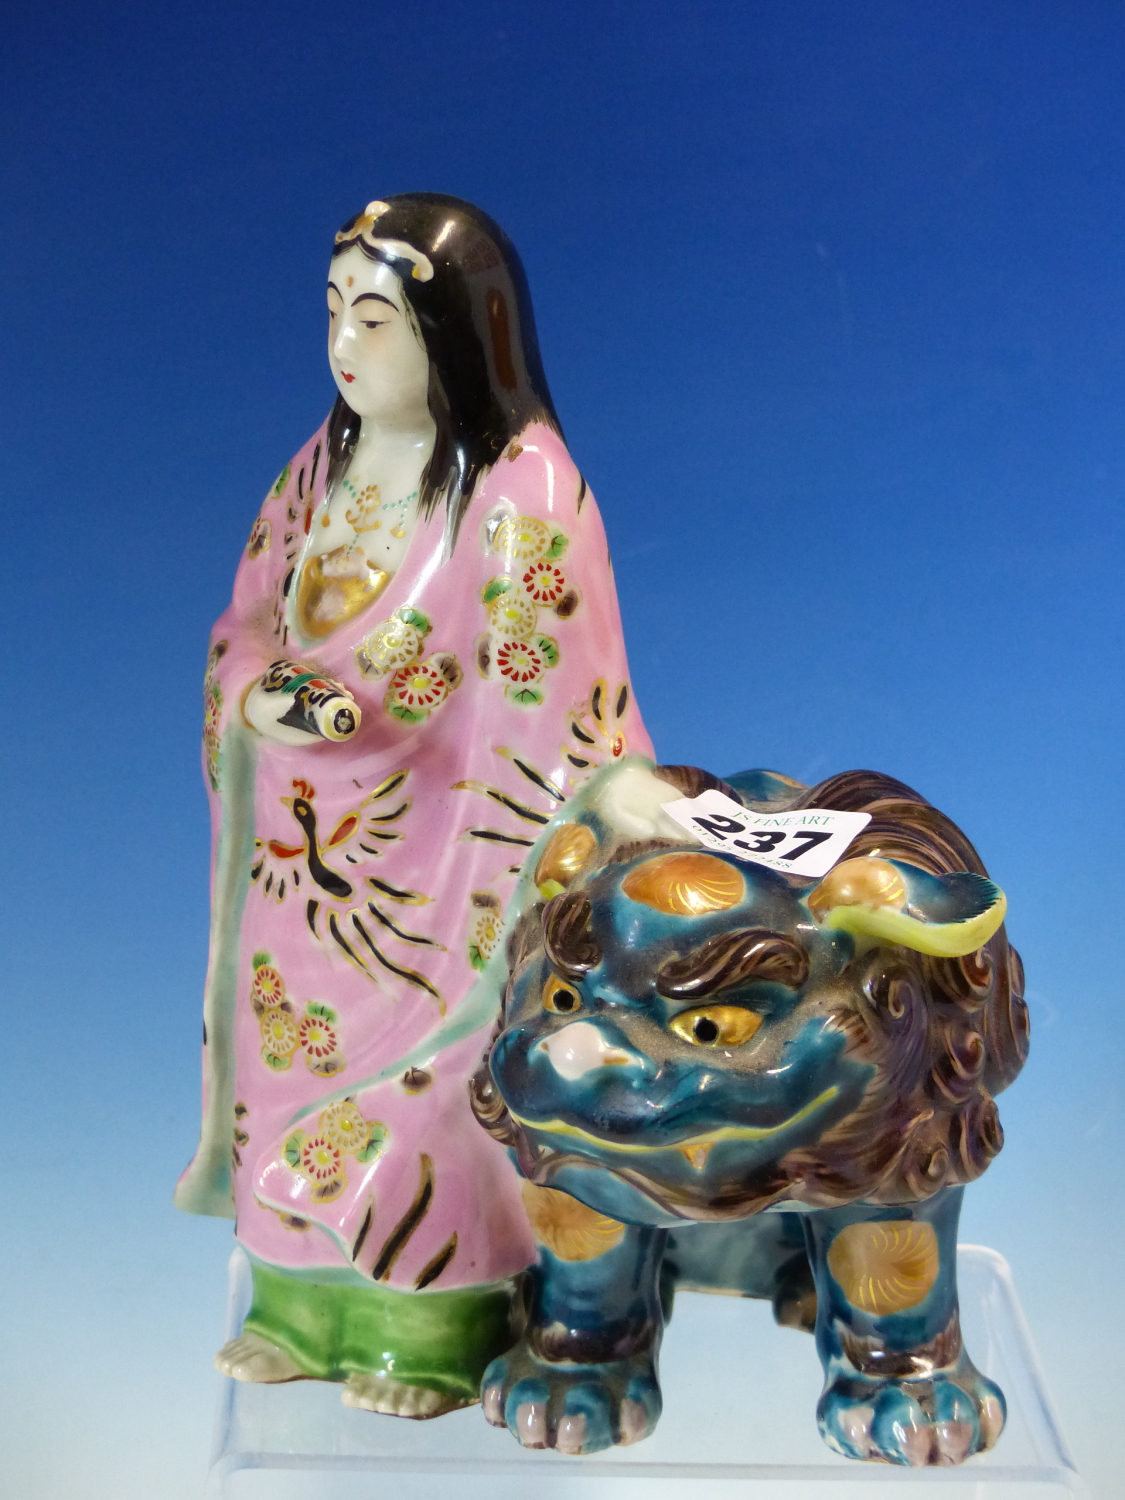 A JAPANESE PORCELAIN FIGURE OF KWANNON STANDING HOLDING A SCROLL, HER PINK ROBE CONTRASTING WITH THE